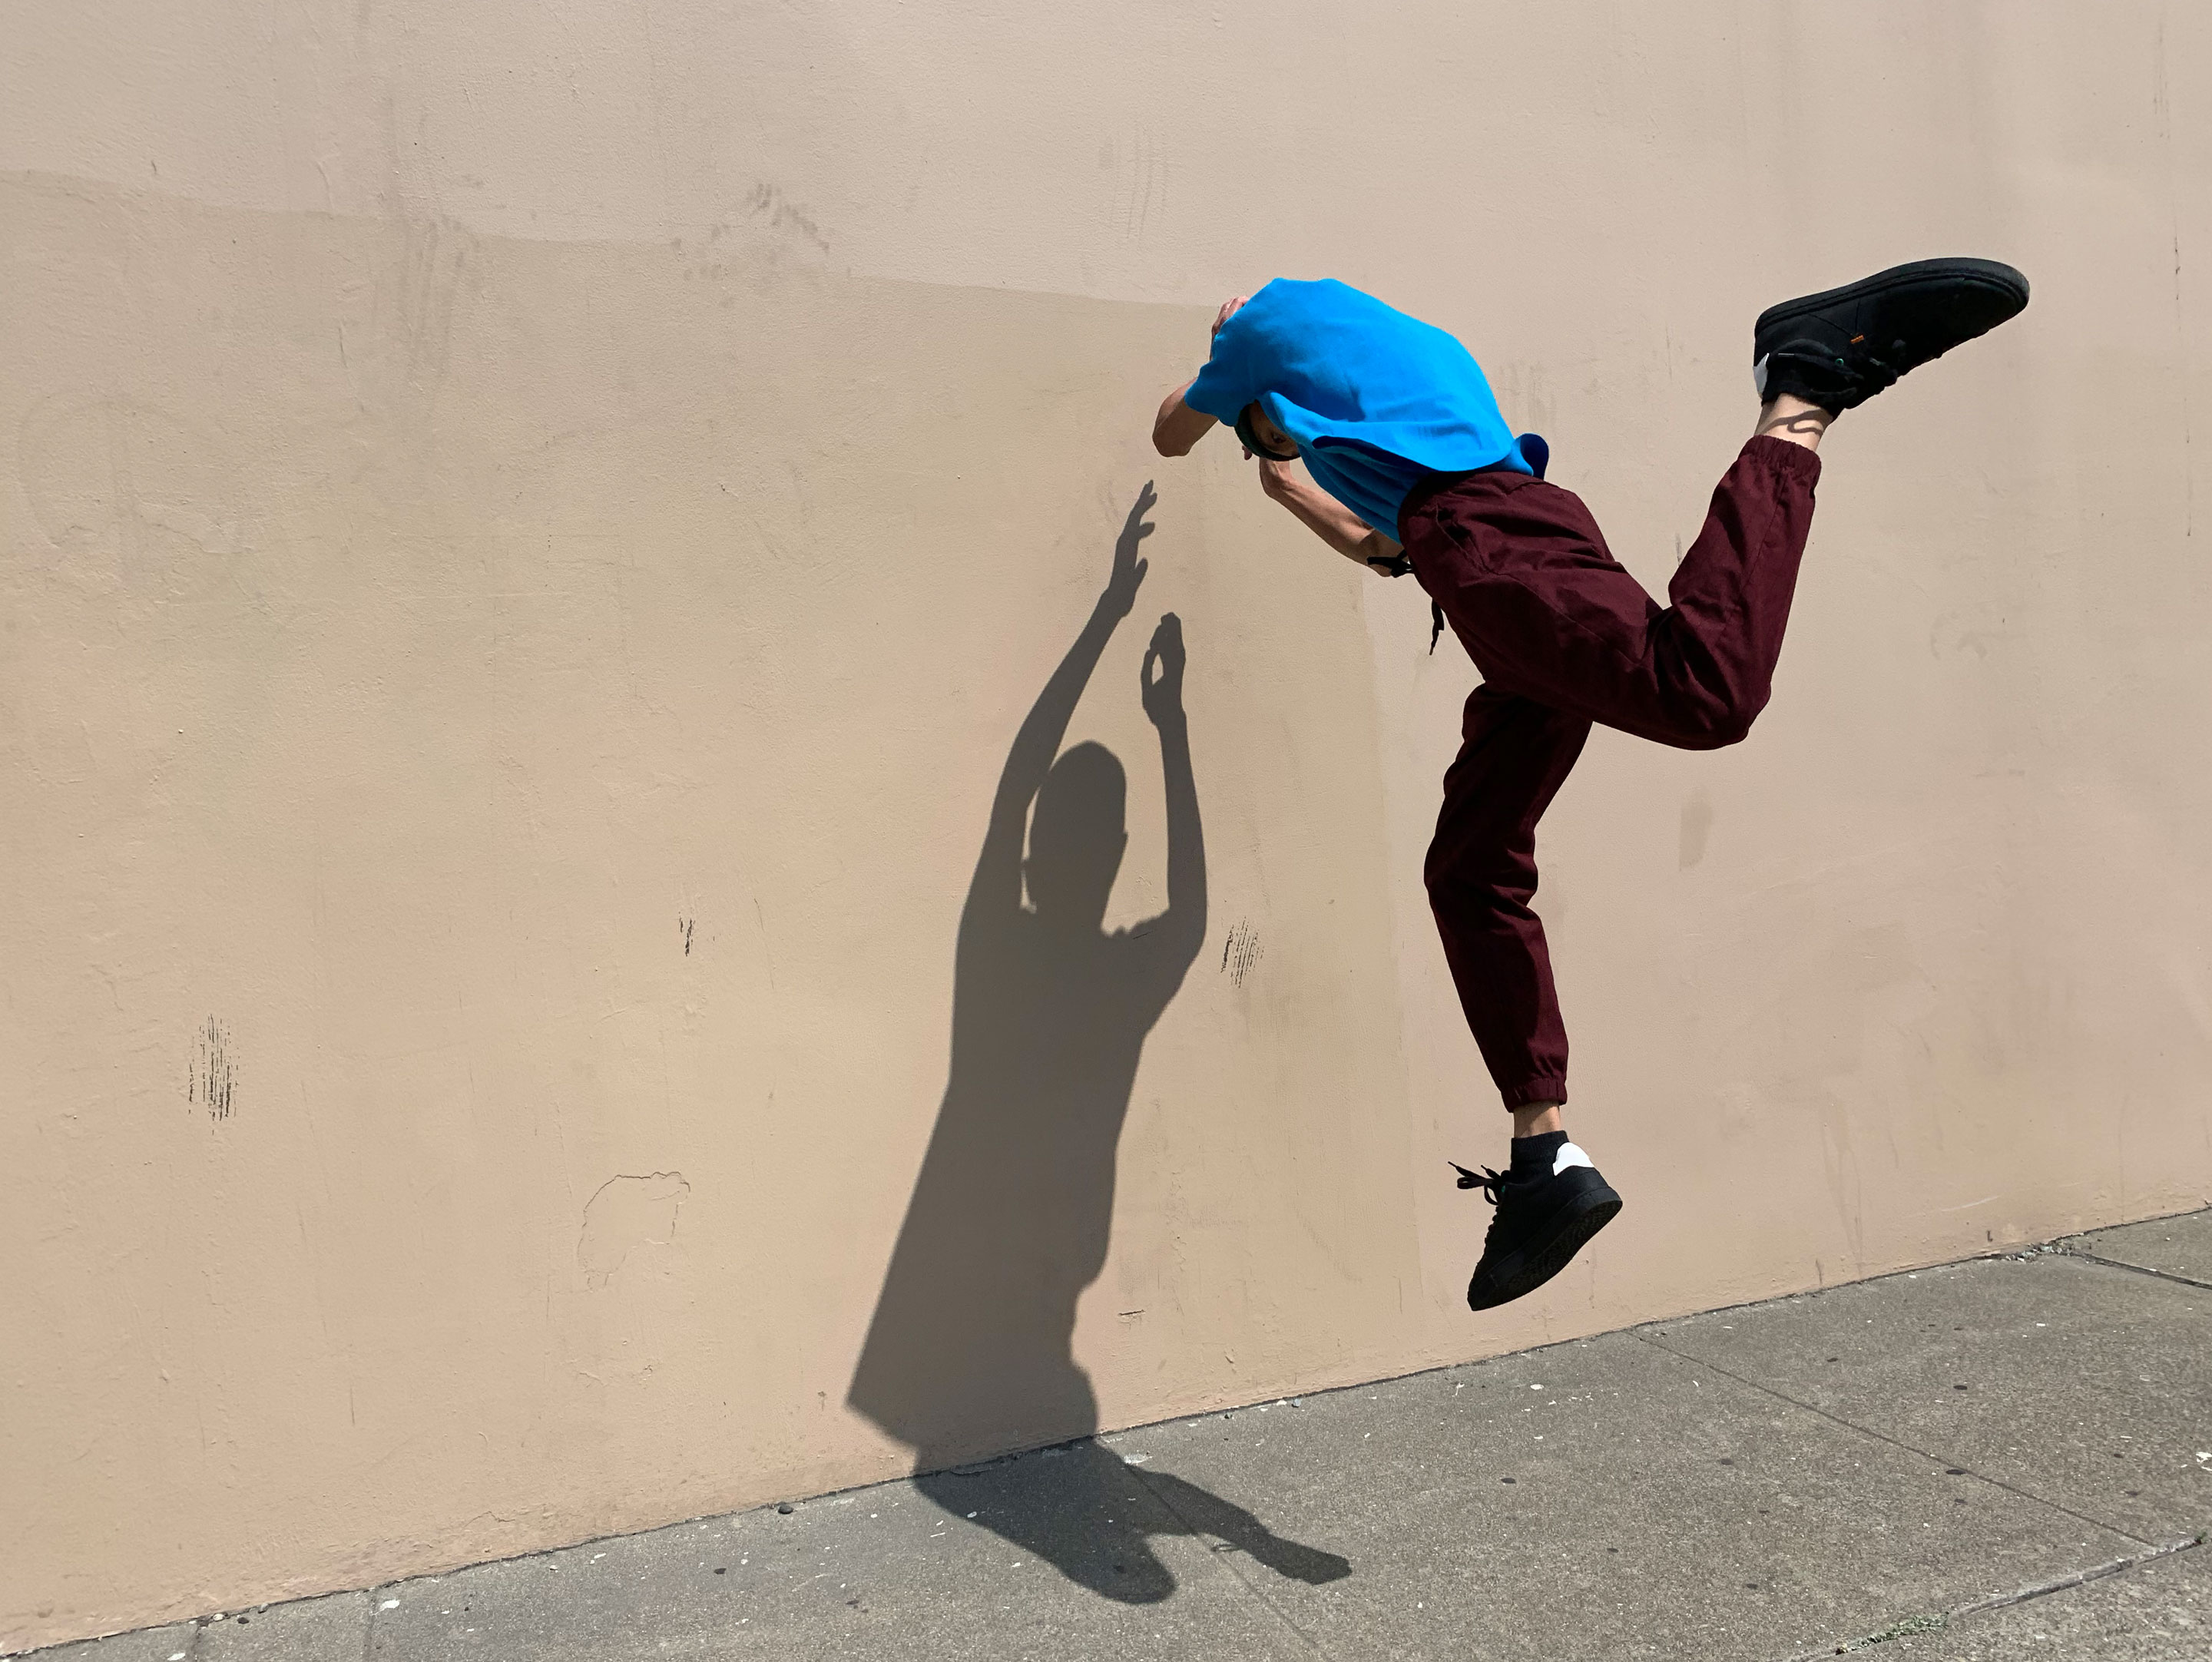 HDR image of a man jumping with his shadow casting on the wall